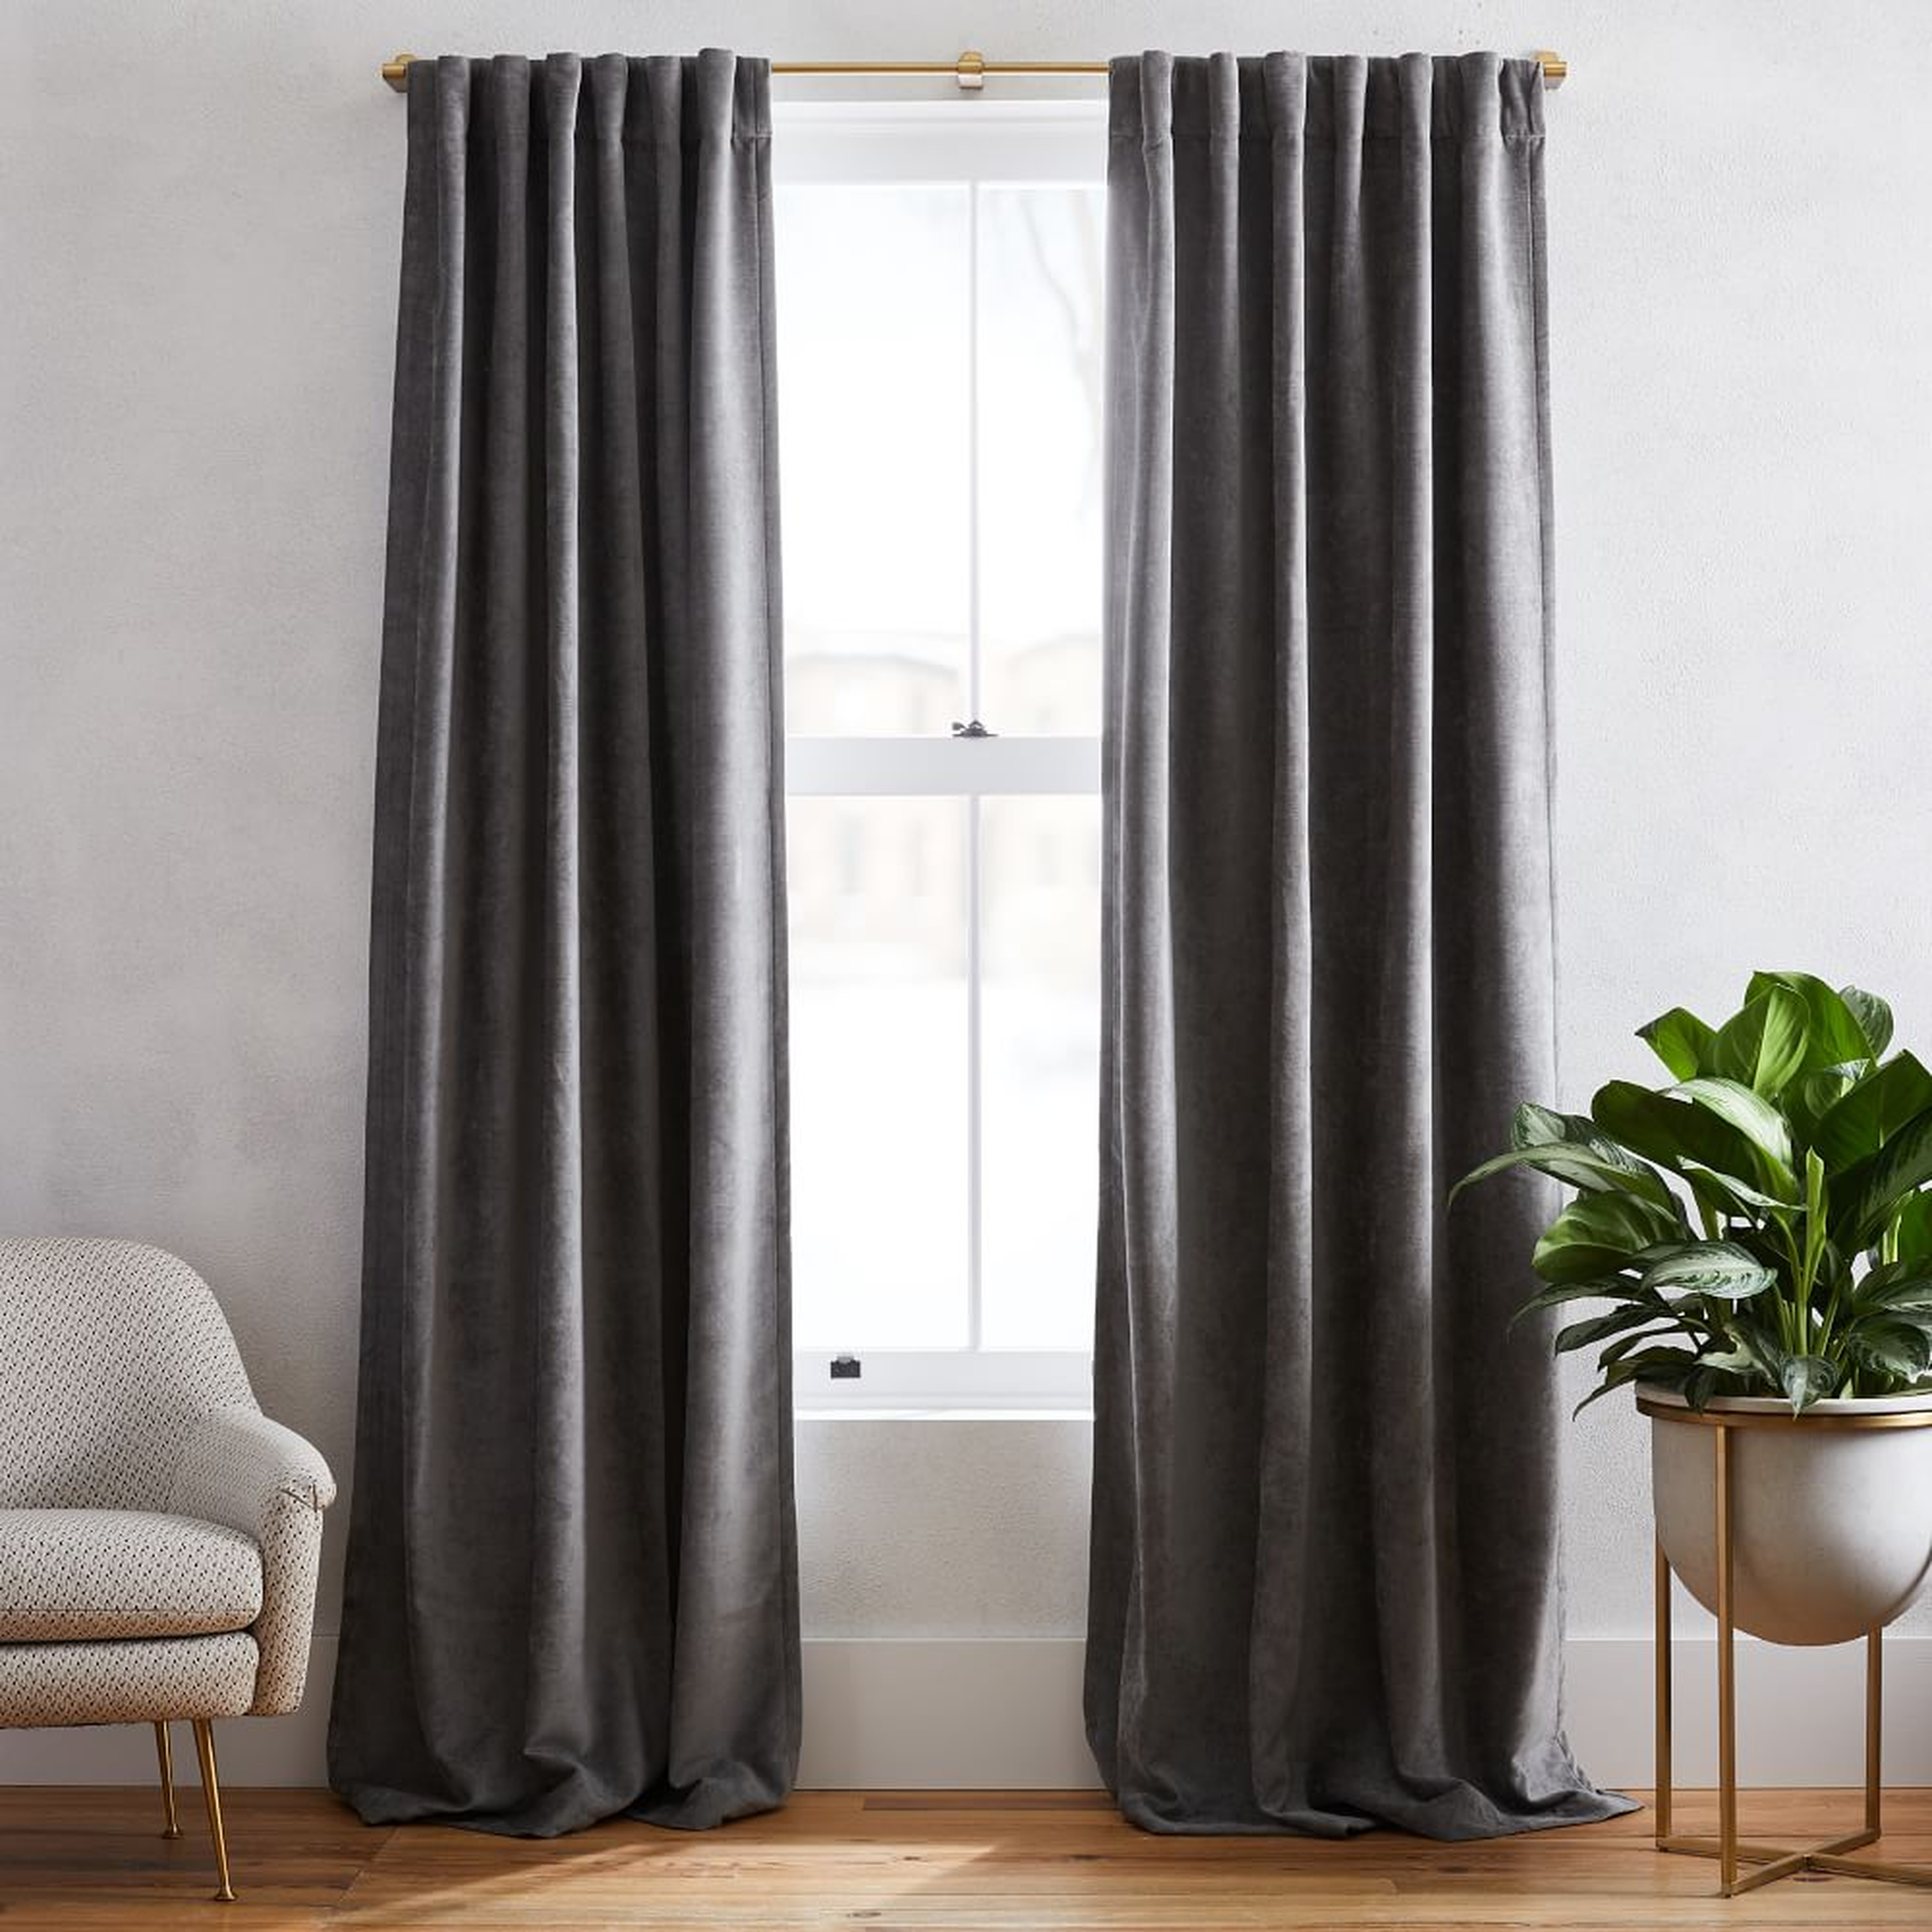 Worn Velvet Curtain with Cotton Lining, Metal, 48"x96", Set of 2 - West Elm